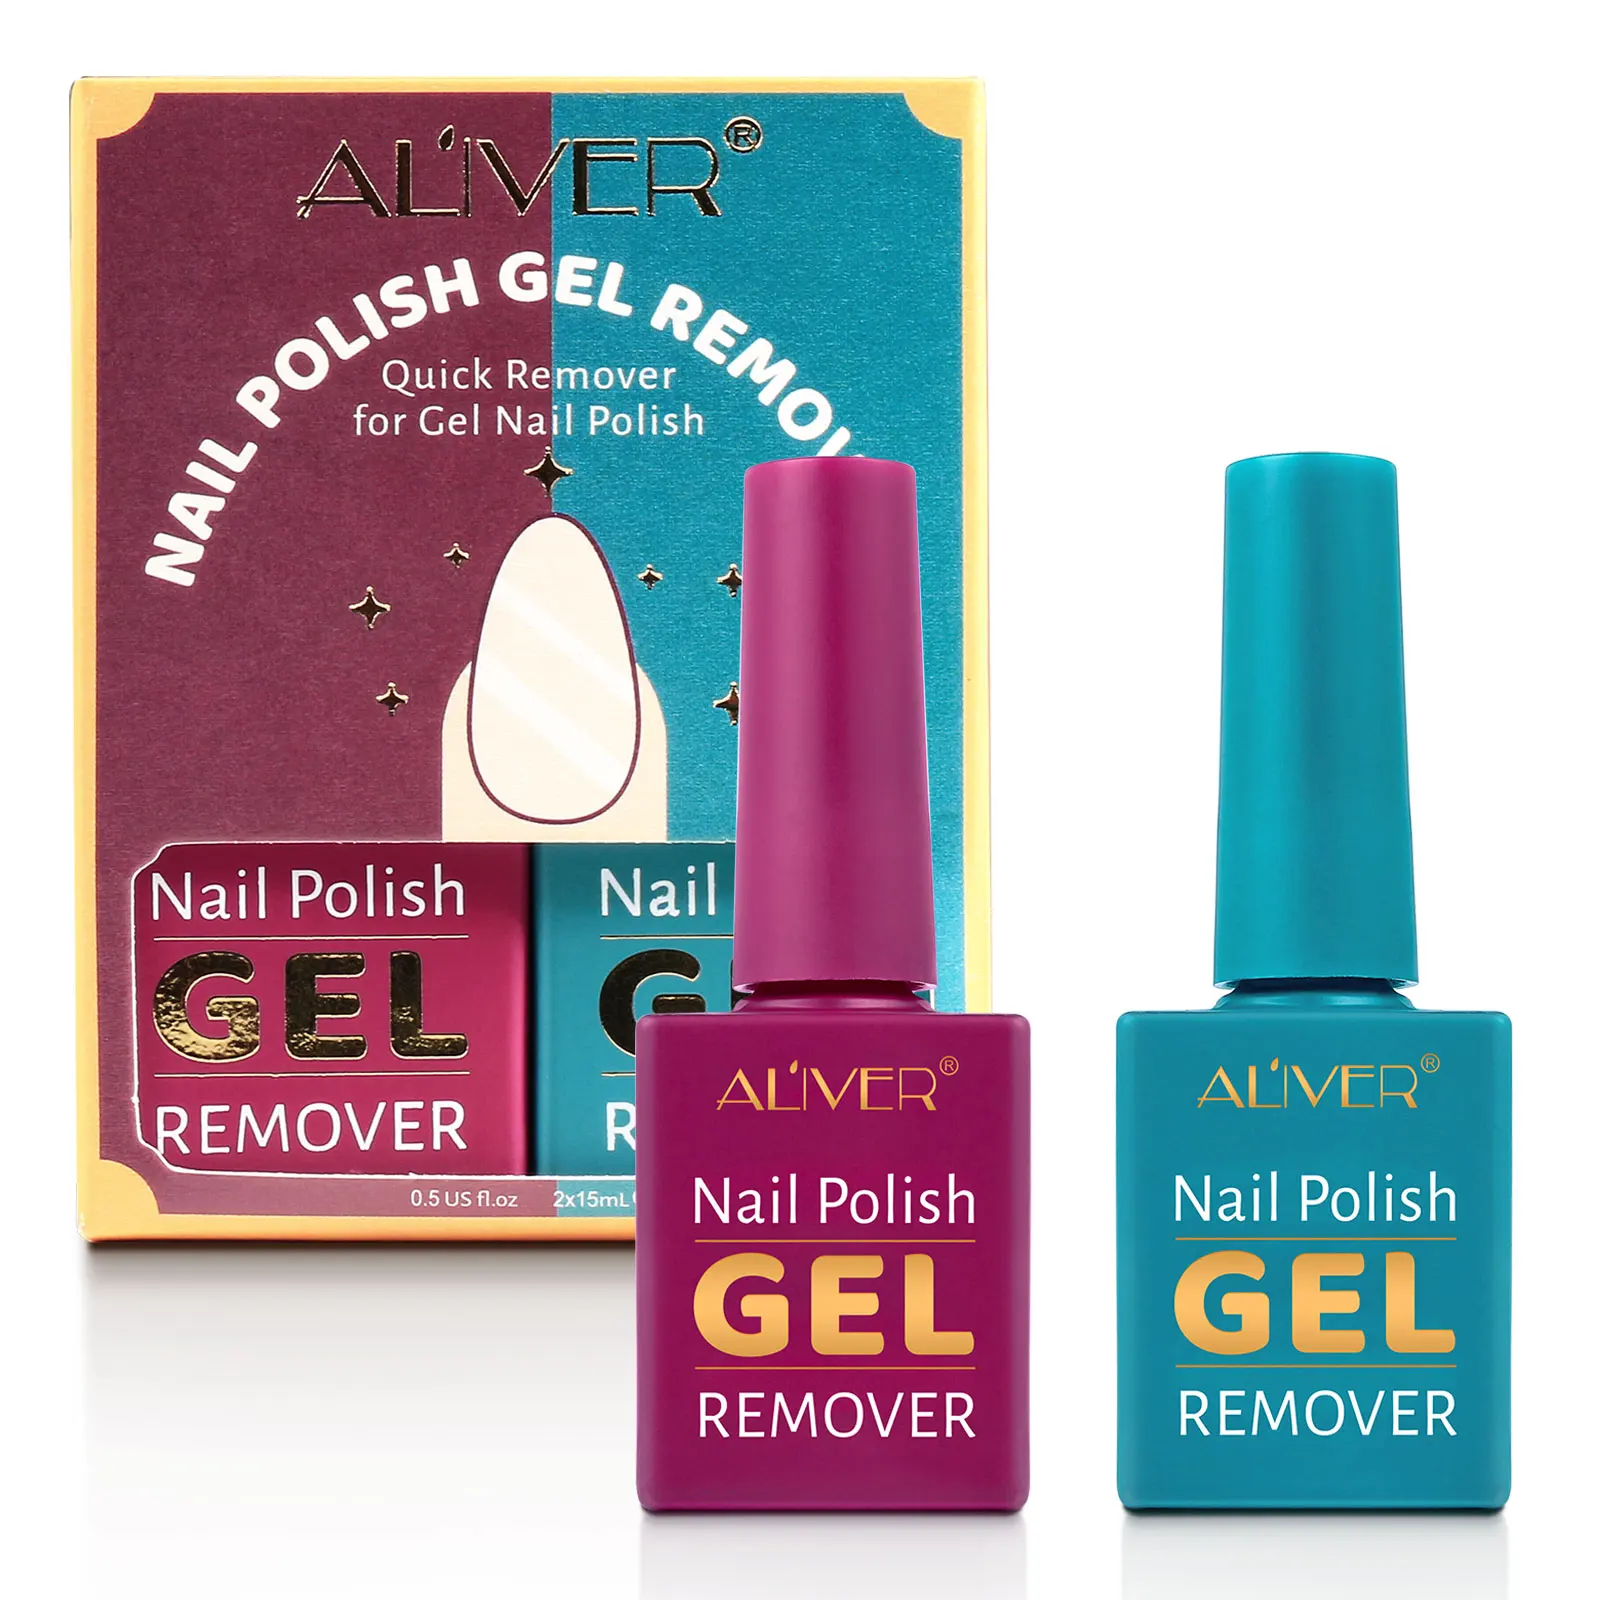 

2 pack nail polish gel remover that quickly and easily removes nail gel in 3-5 minutes